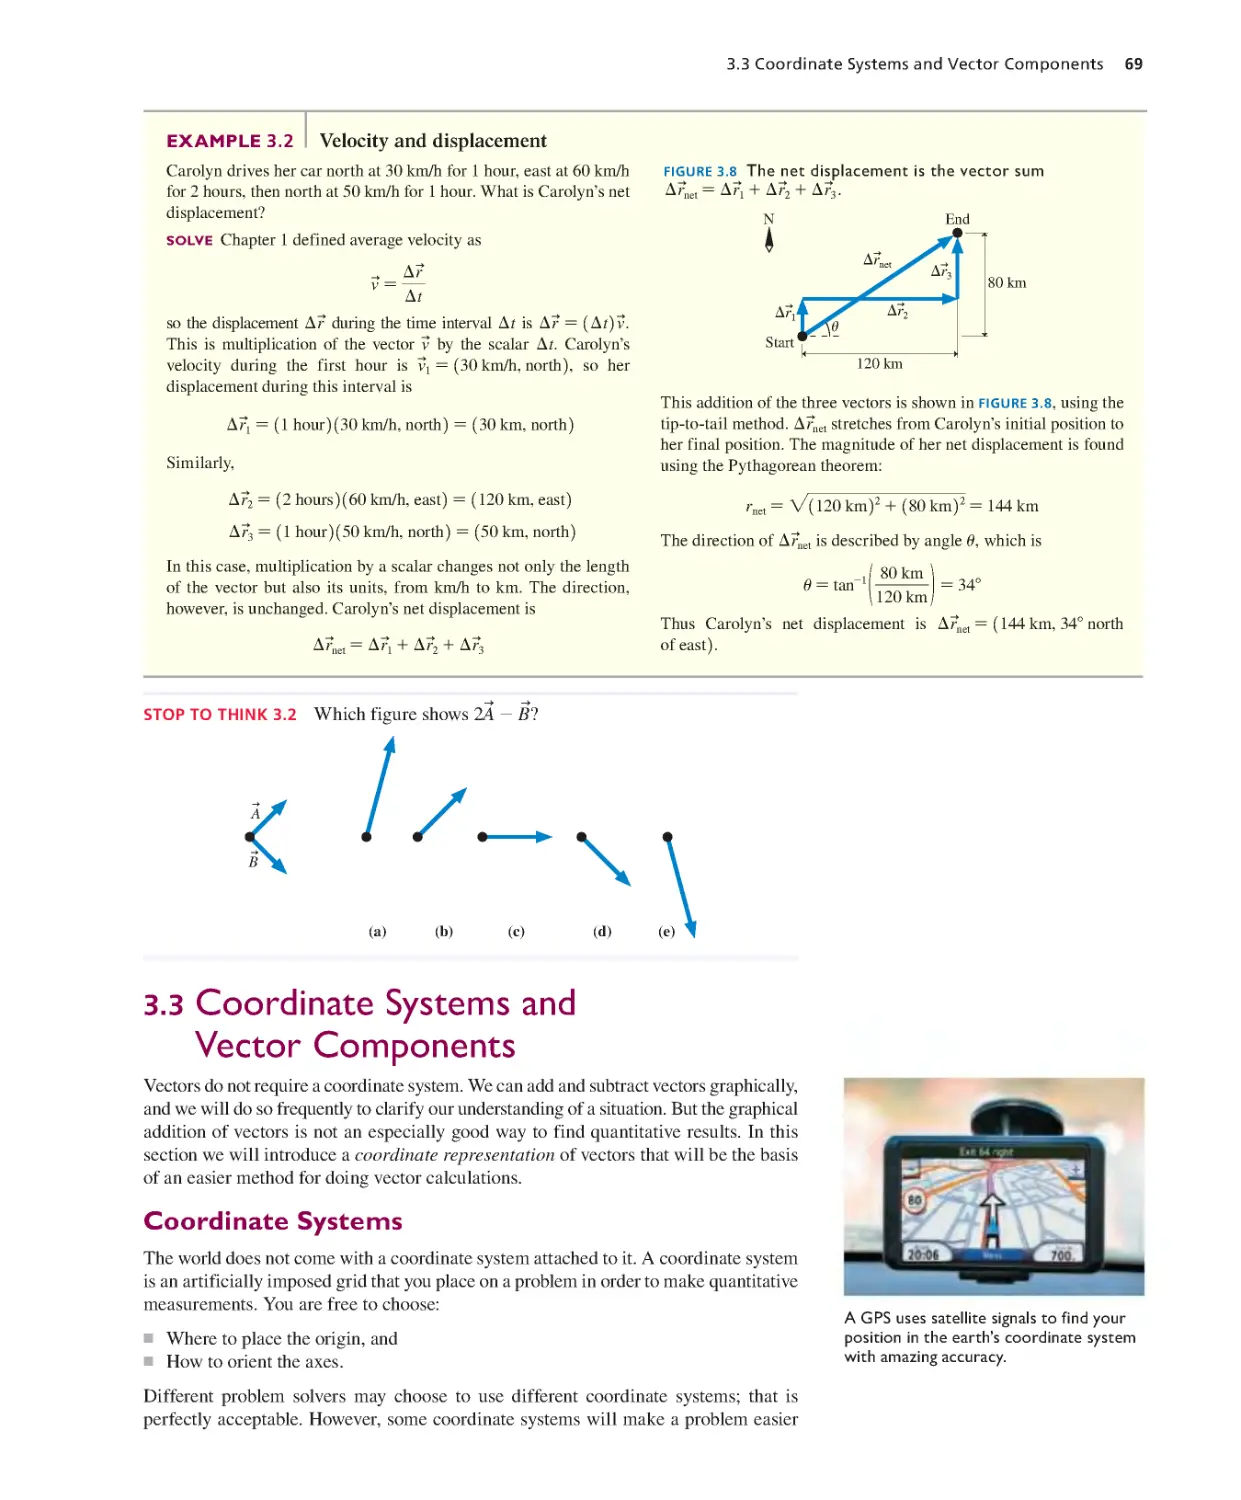 3.3. Coordinate Systems and Vector Components